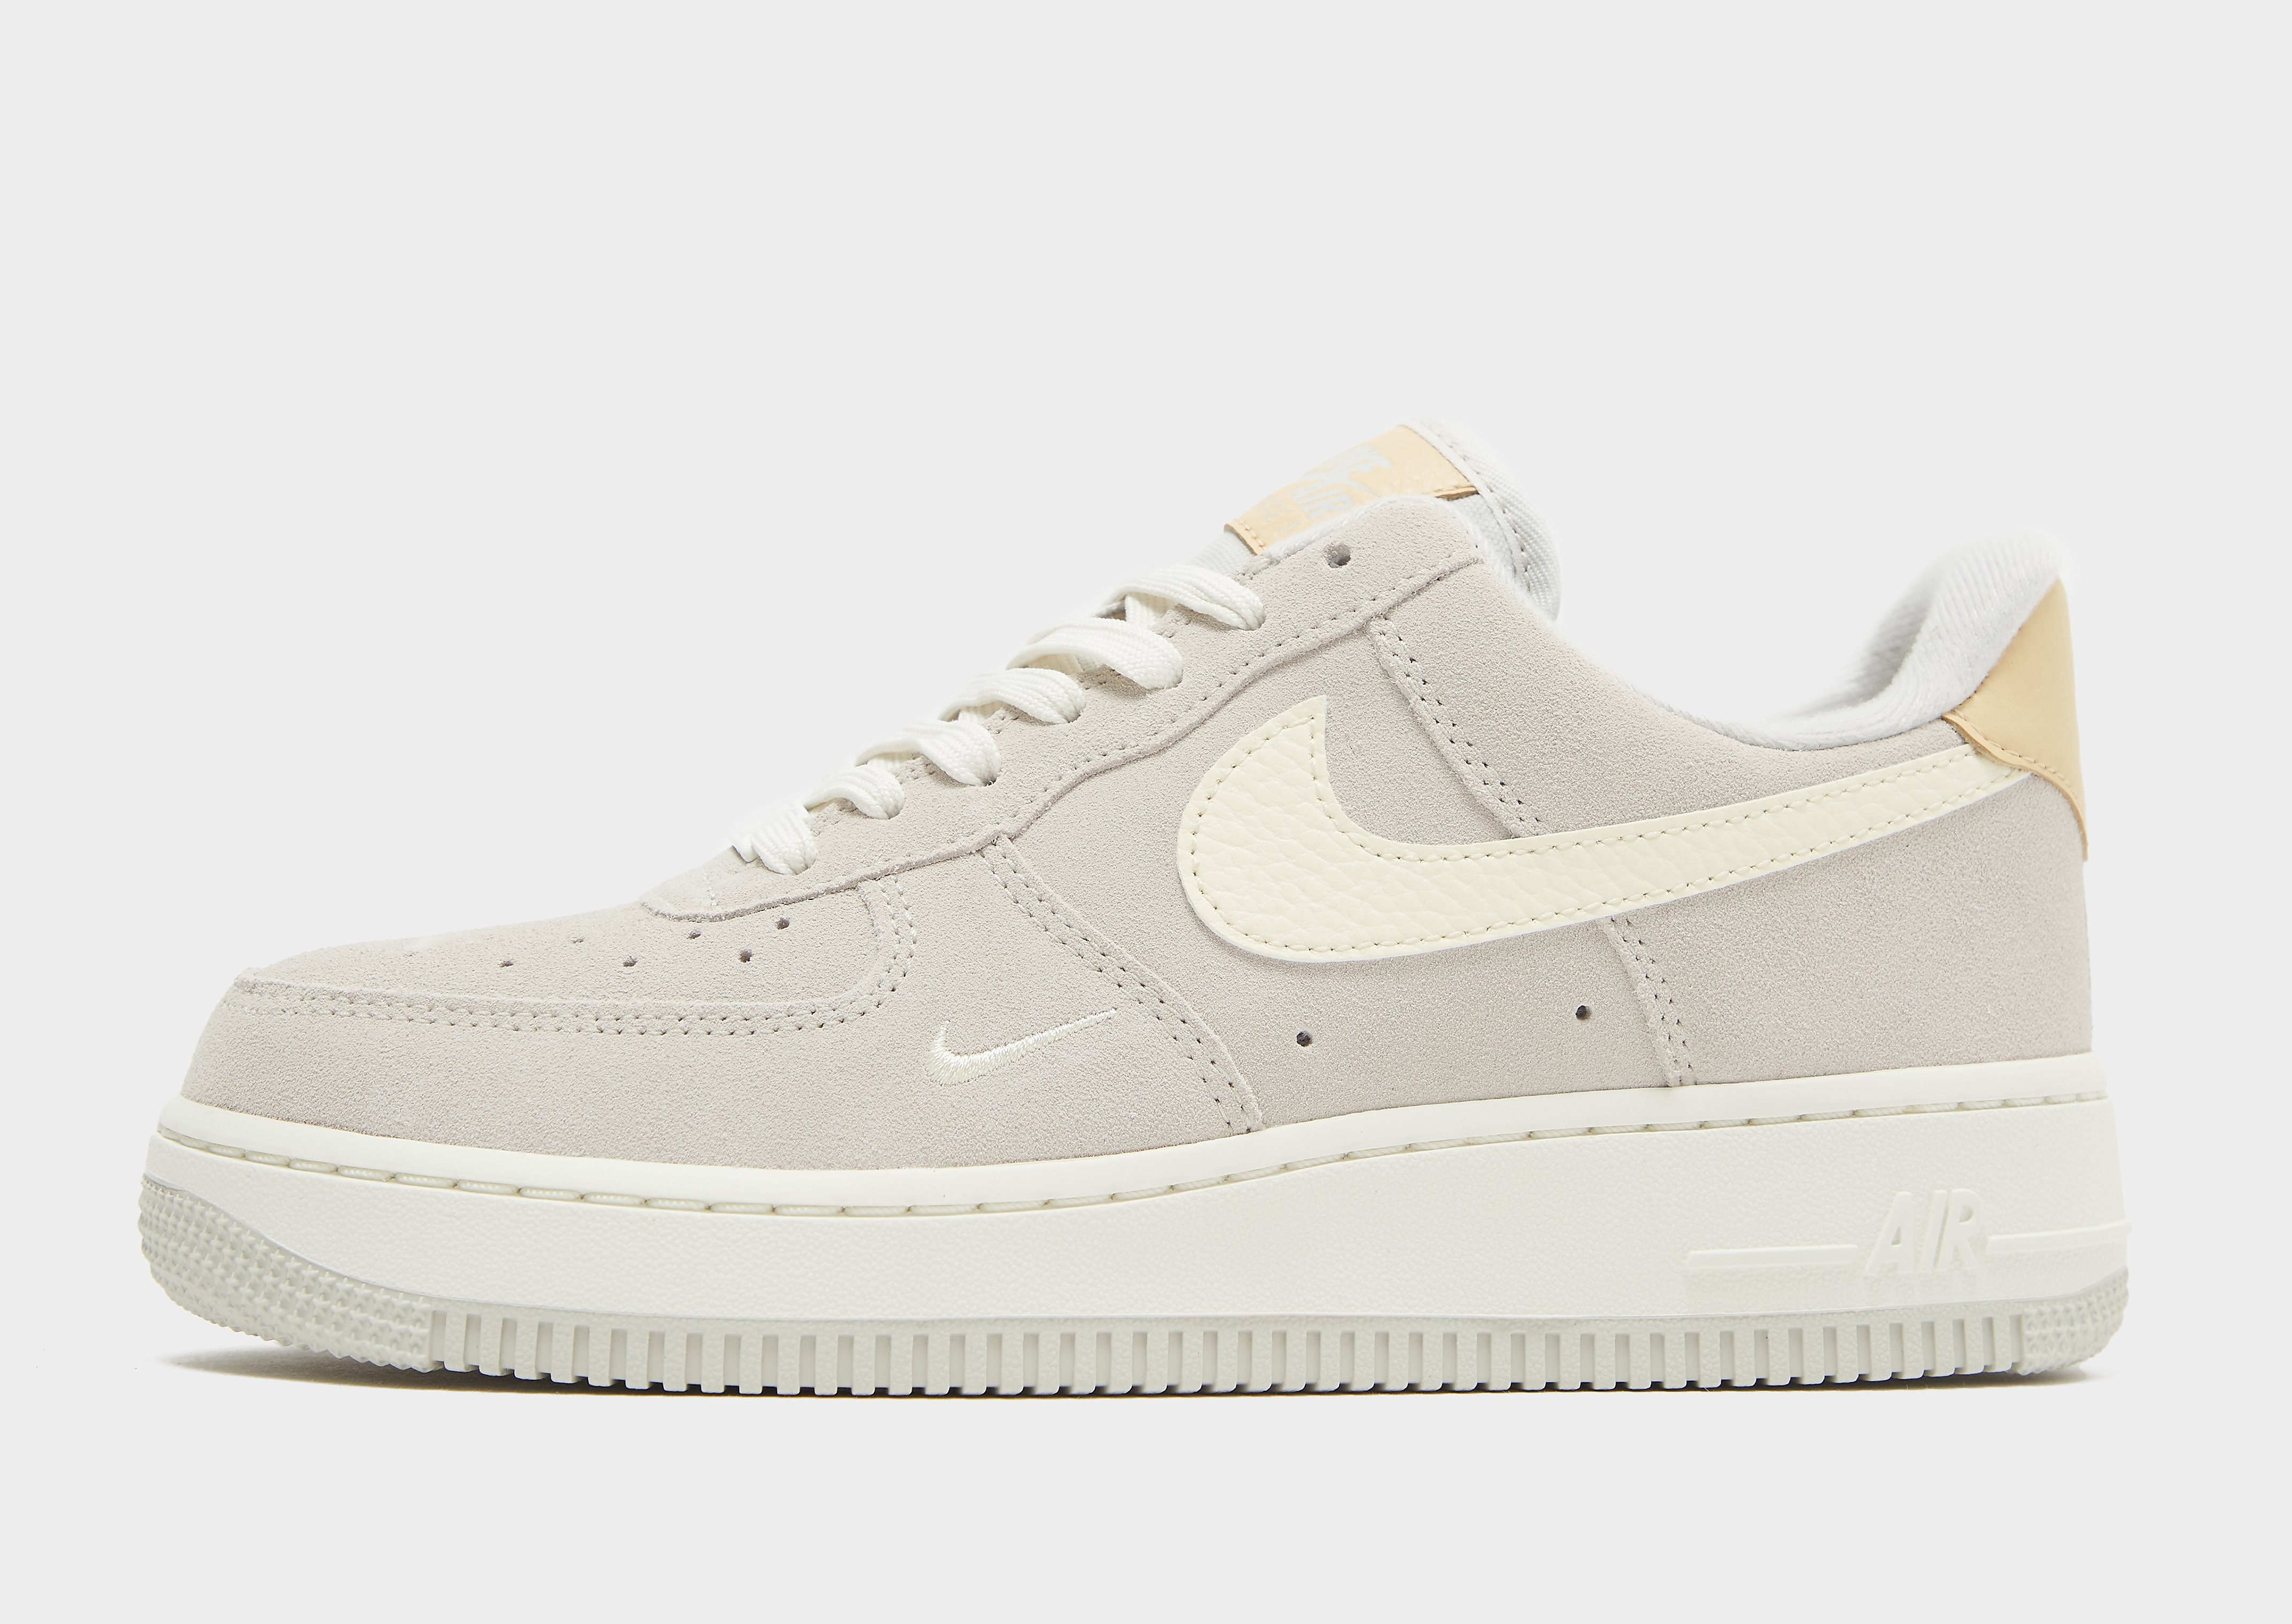 Nike Air Force 1 Low Women's - Only at JD - Castanho - Womens, Castanho